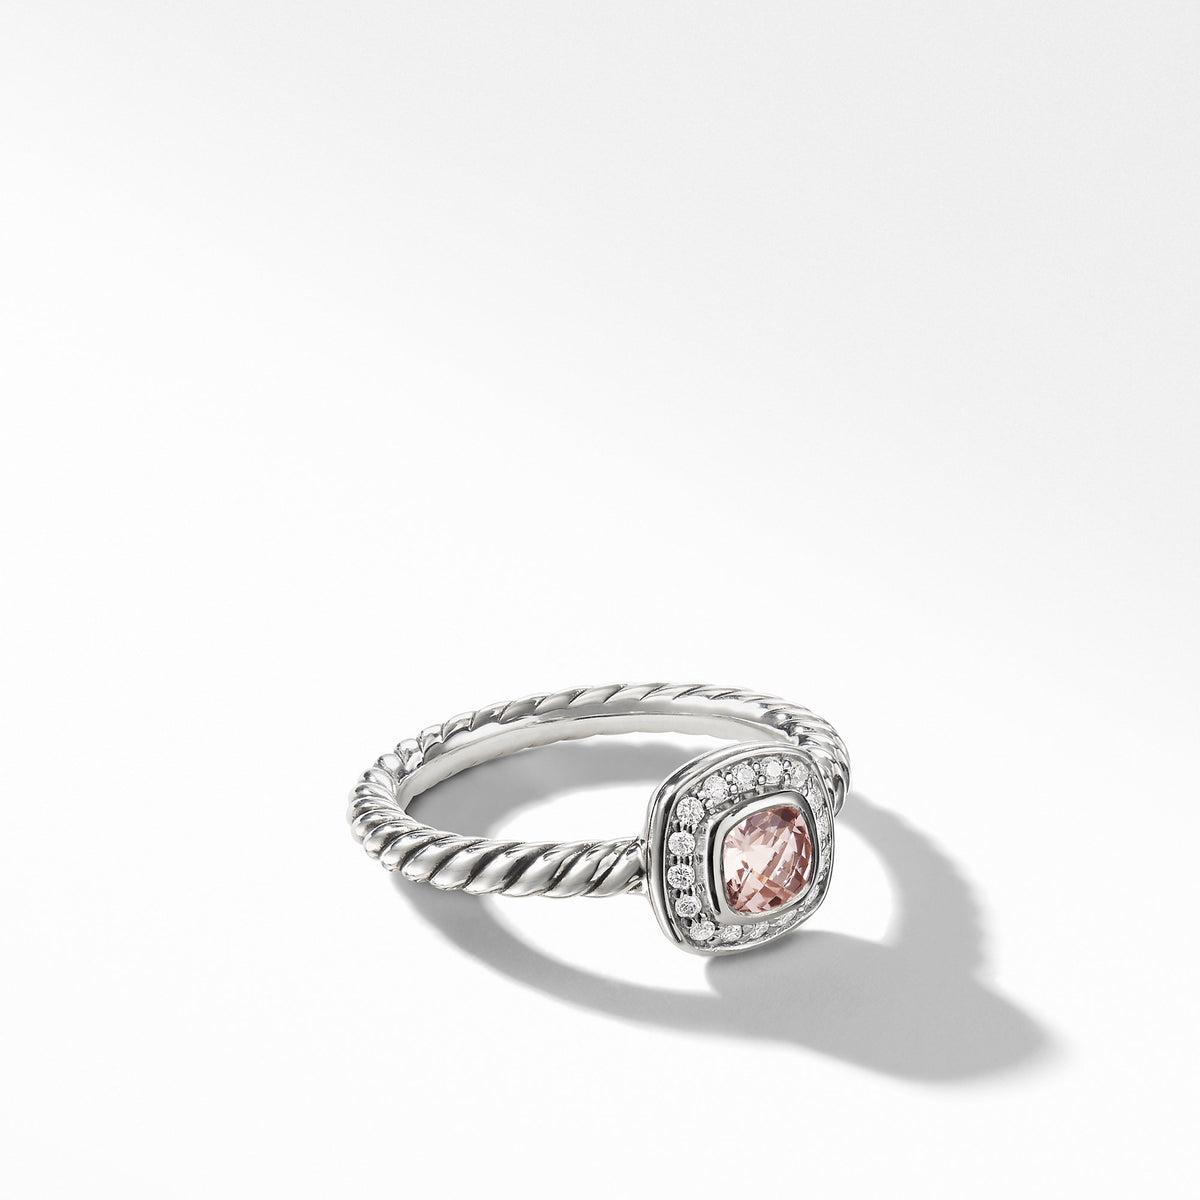 Albion Kids Ring with Morganite and Diamonds, 4mm